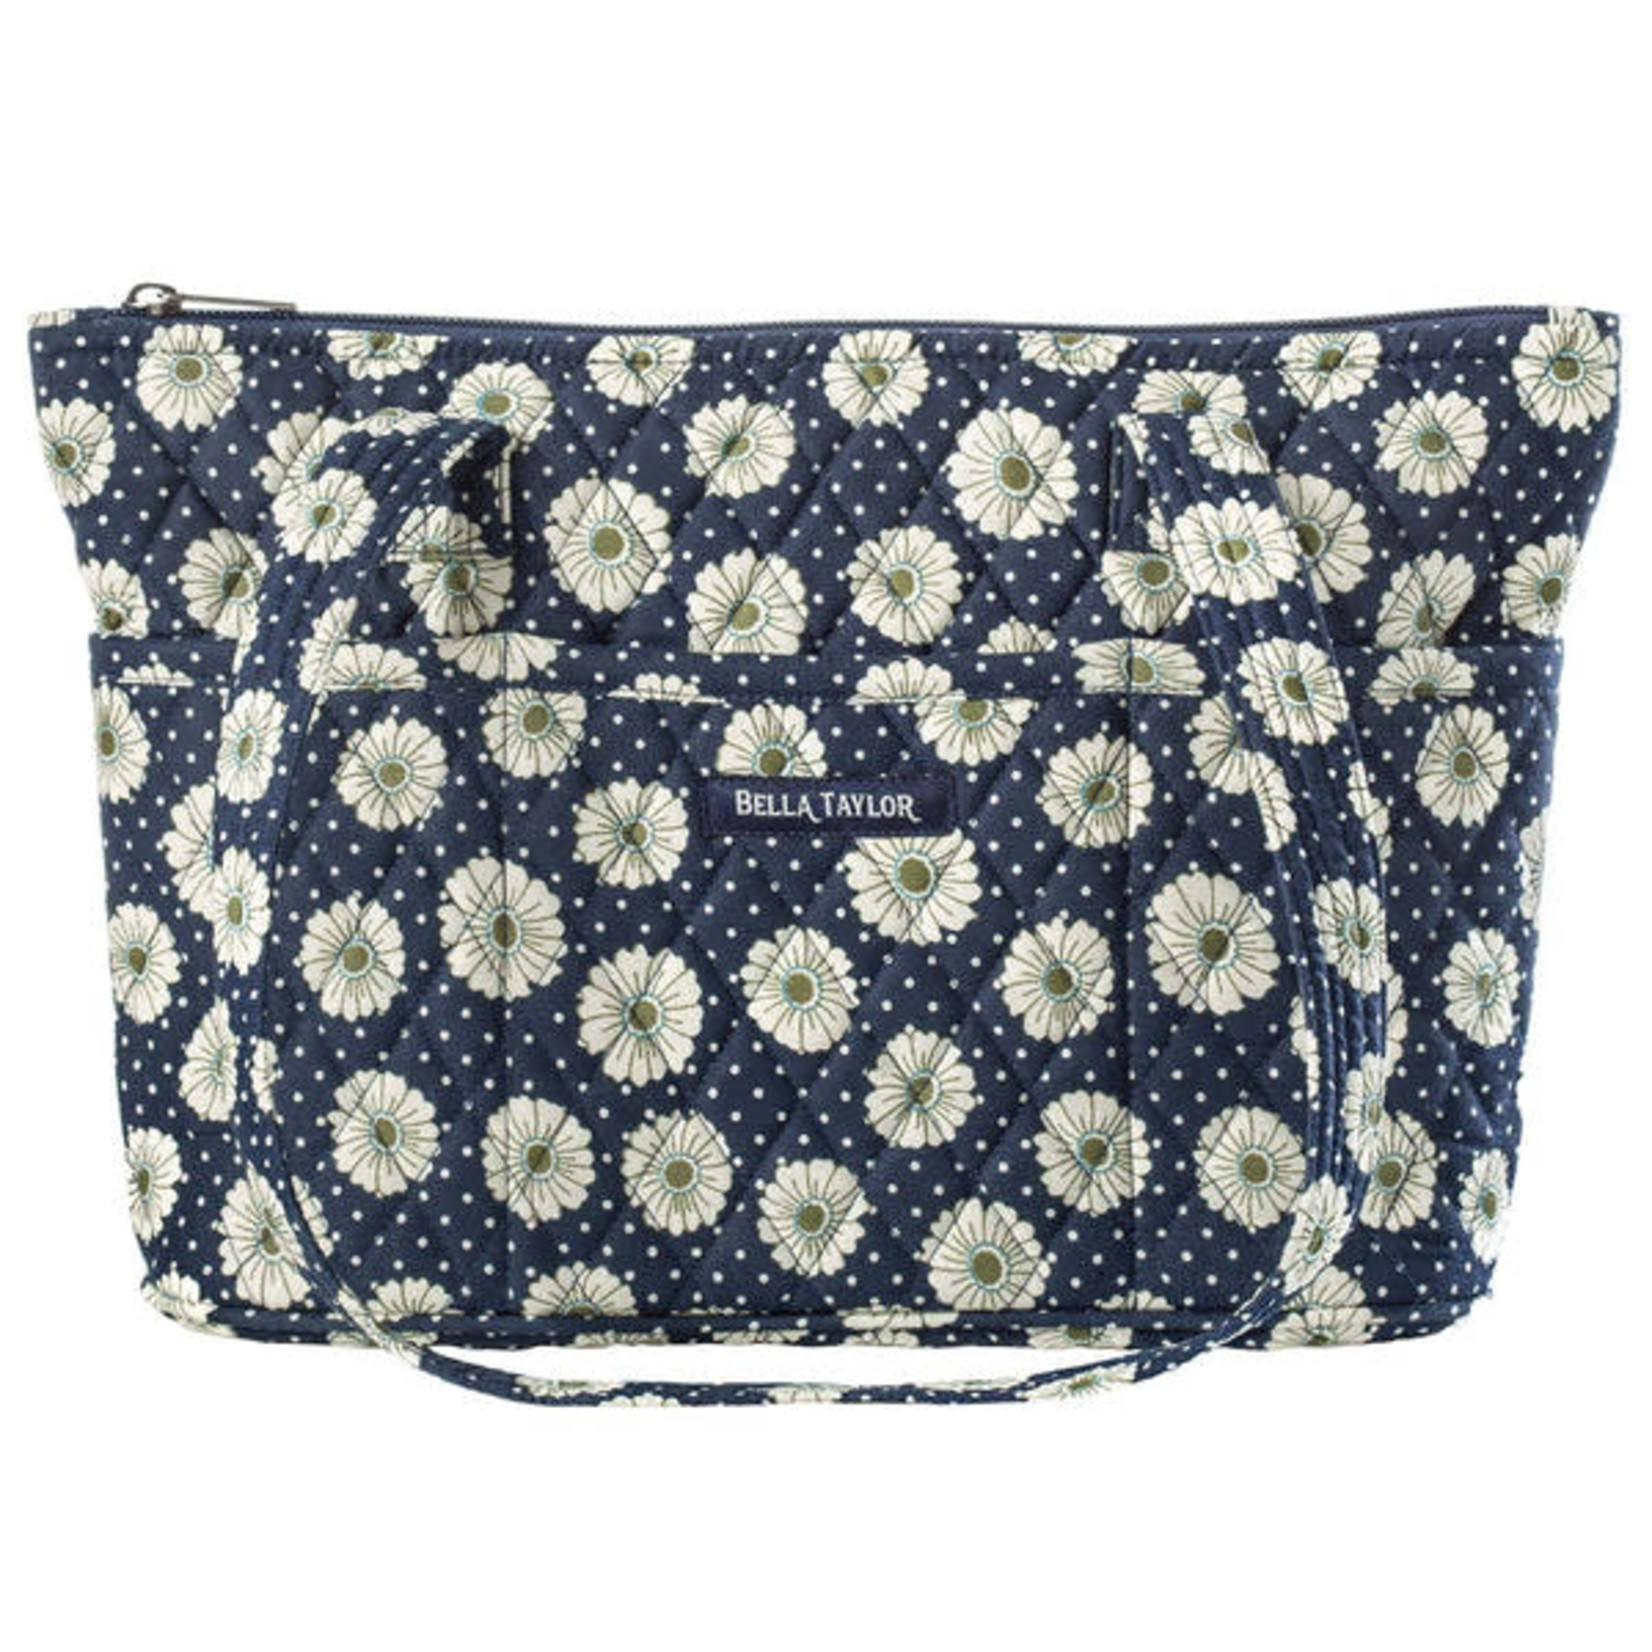 Bella Taylor Dotted Daisy Navy - Small Shoulder Tote